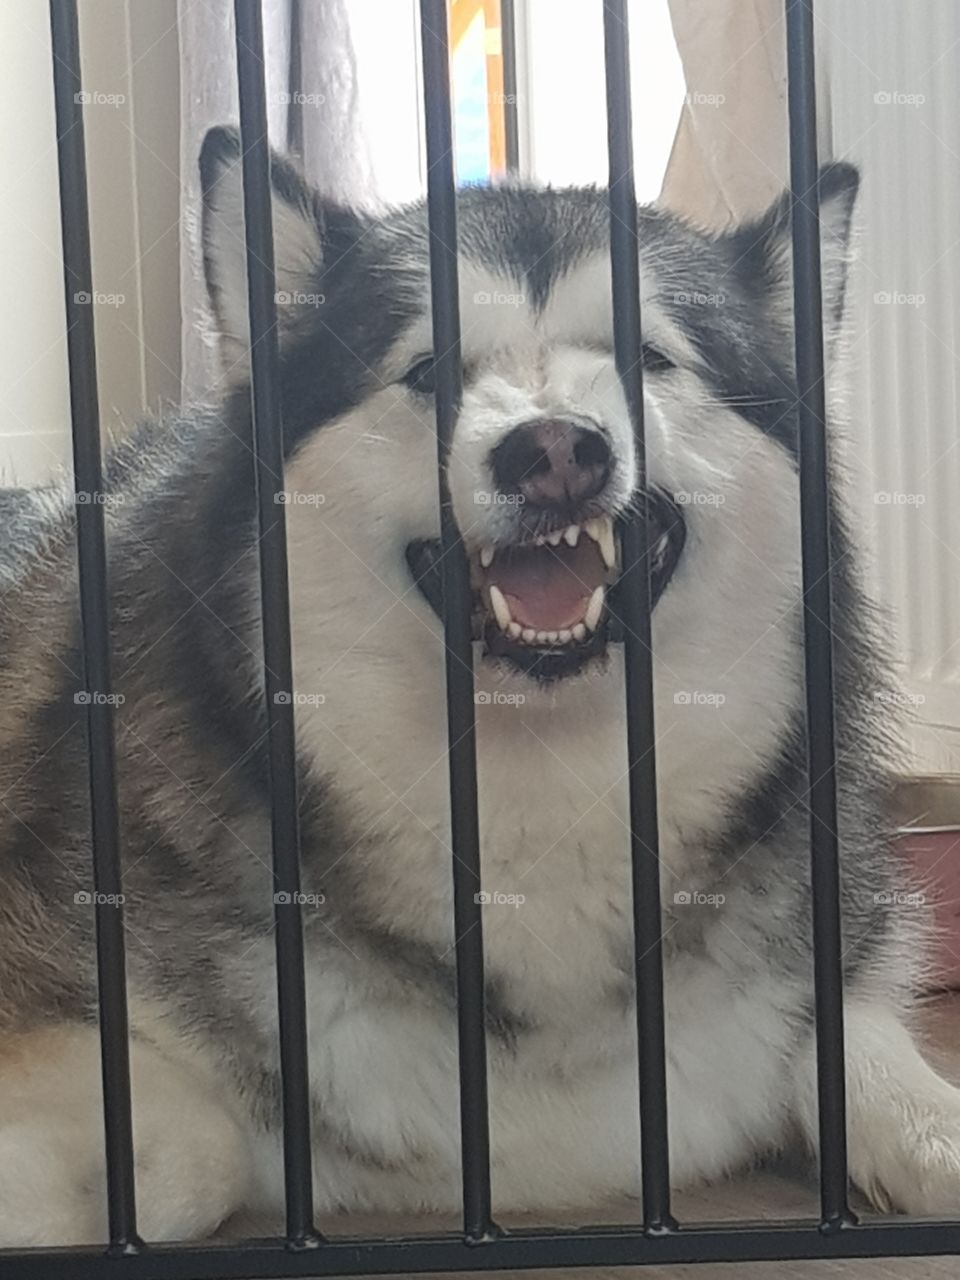 Does my nose look big in this? Alaskan Malamute dog rests her face through the bars of a baby gate